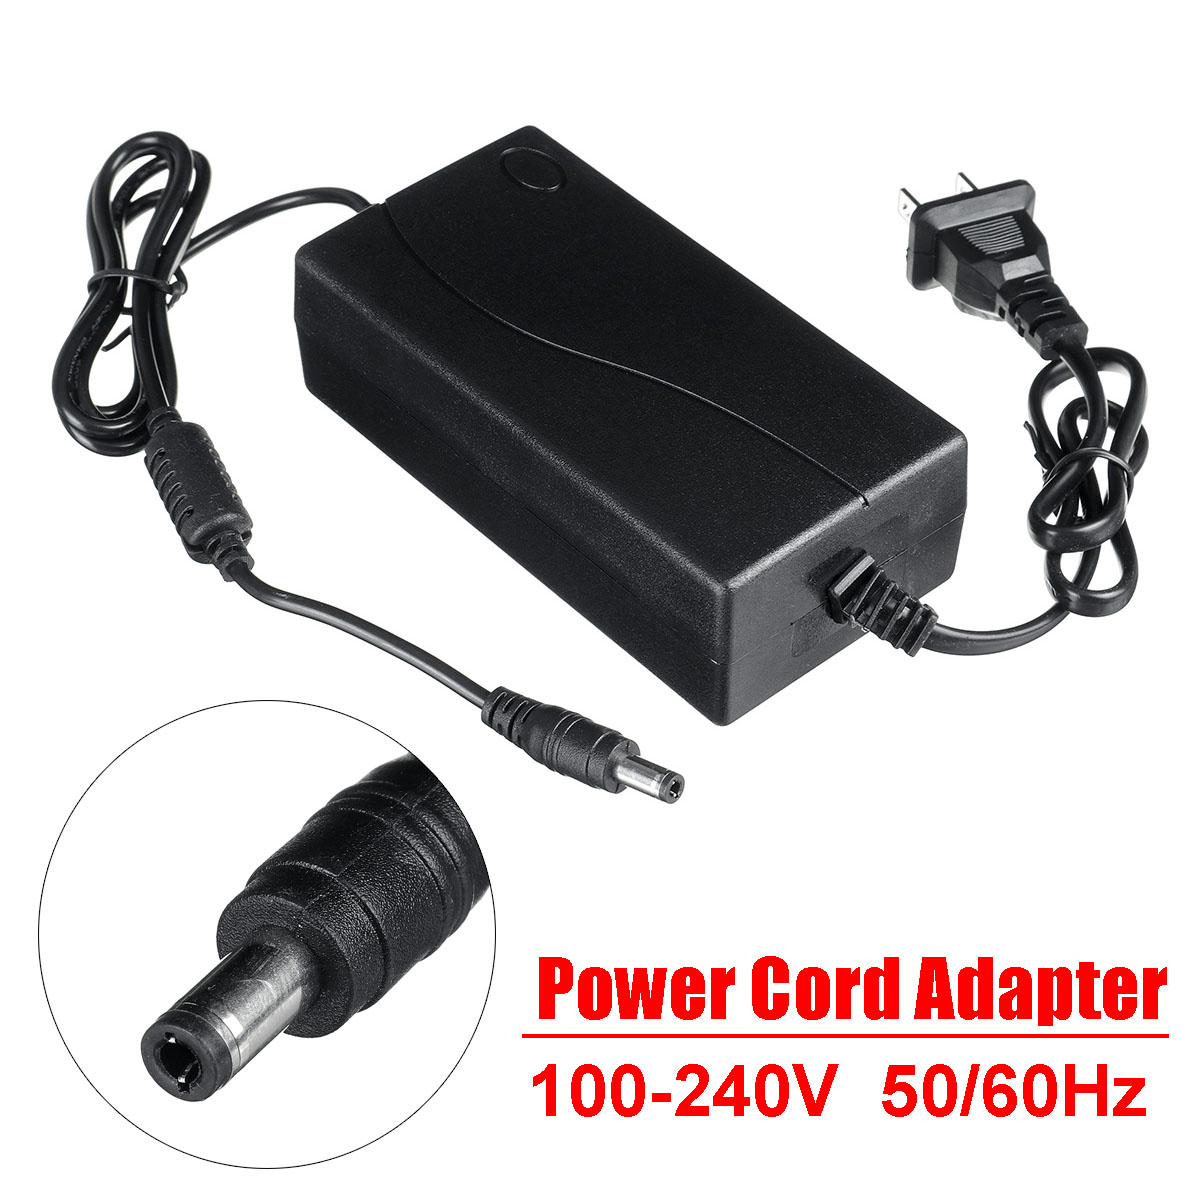 100-240V 6A Power Cord Adapter 50 / 60HZ Power Cable Adapter Laptop Charger